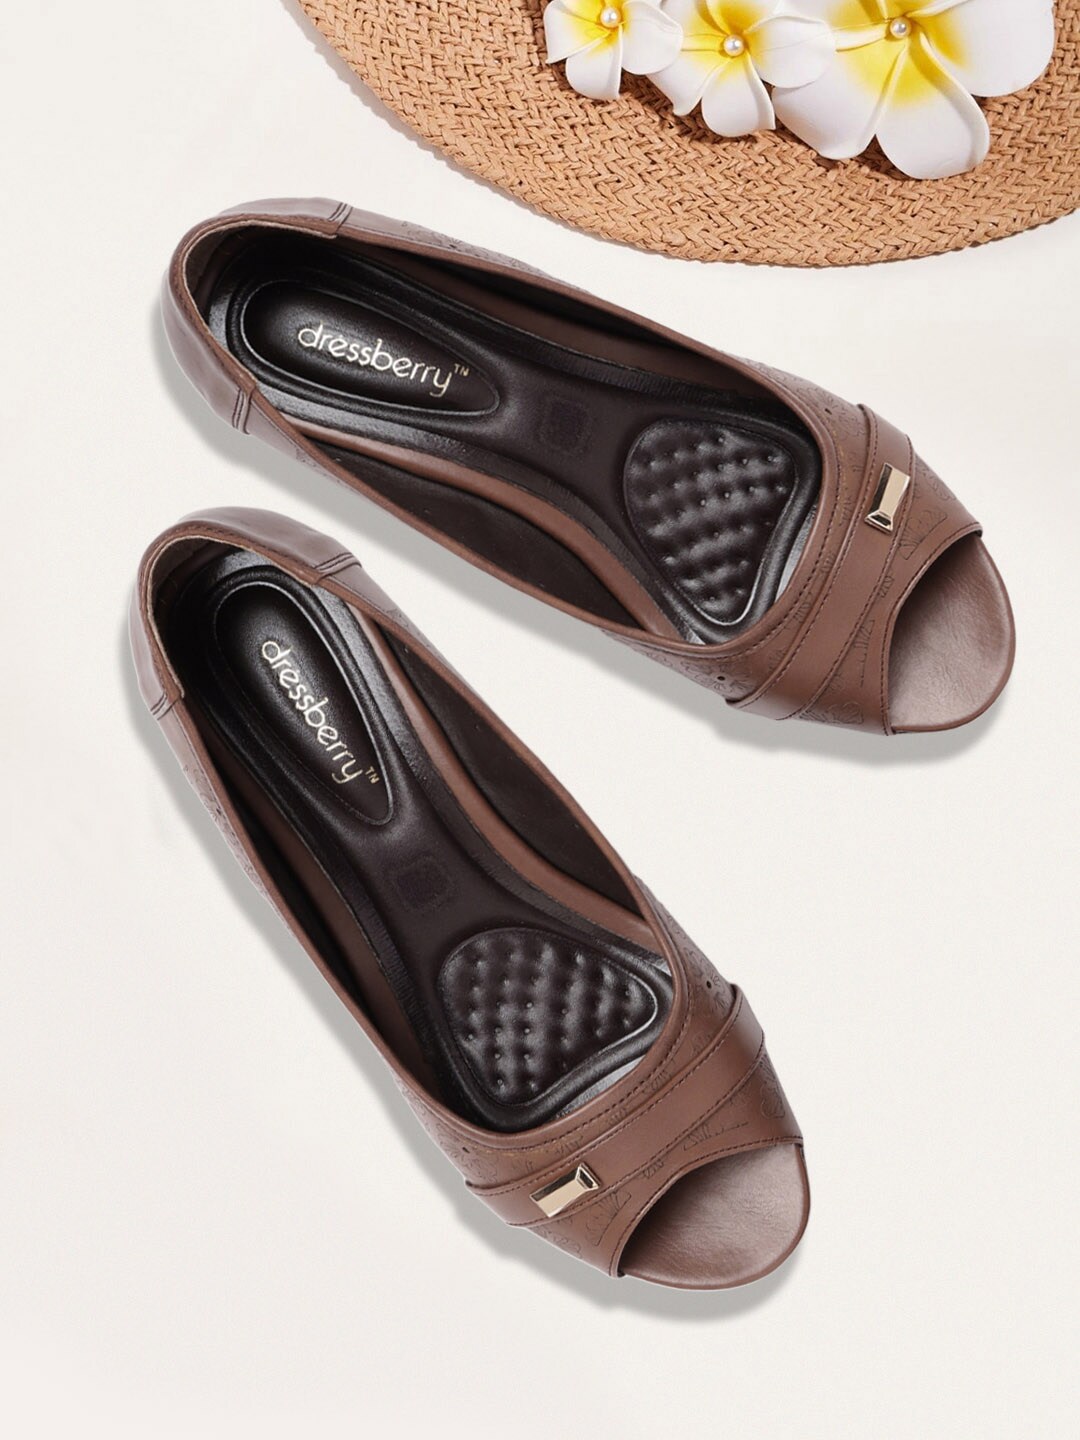 DressBerry Coffee Brown Floral Printed Wedges with Laser Cuts & Buckle Detail Price in India